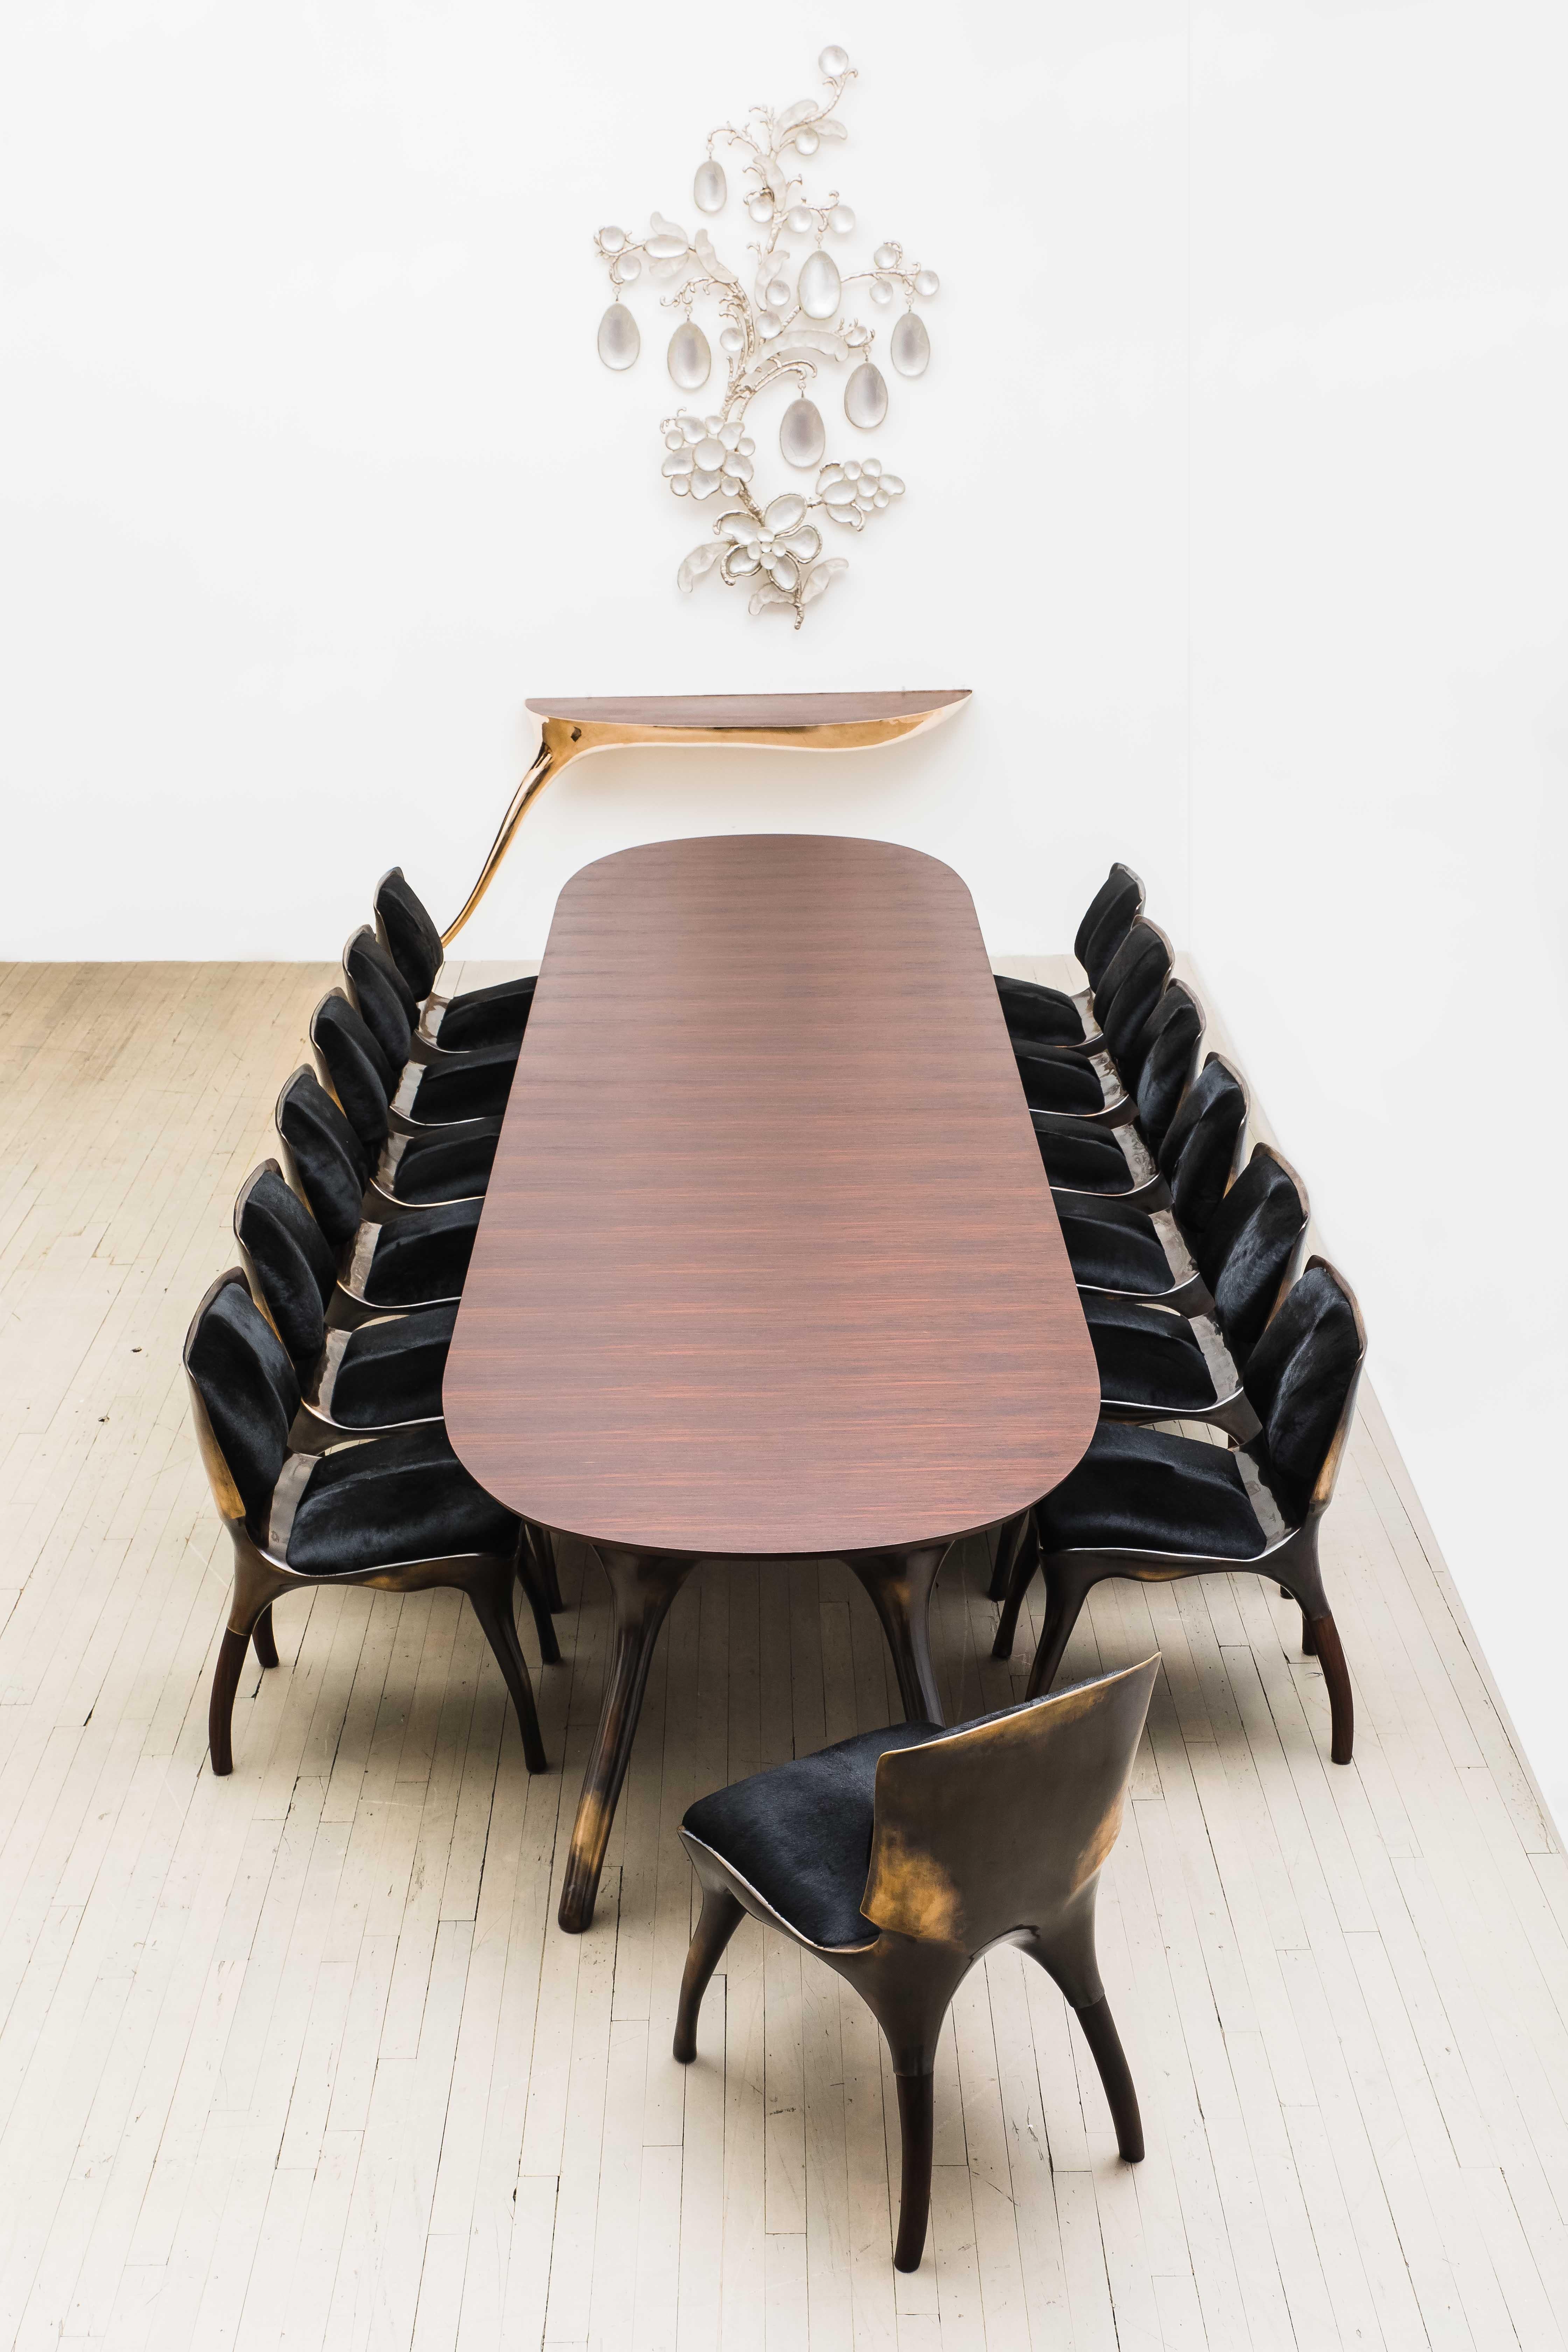 Alex Roskin’s Monumental bronze and rosewood dining table runs an impressive 14 feet, with the ability to seat between 12 to 14 people. The table’s base follows Roskin’s penchant for muscular forms, bowed and sinuous. The base form is first sculpted